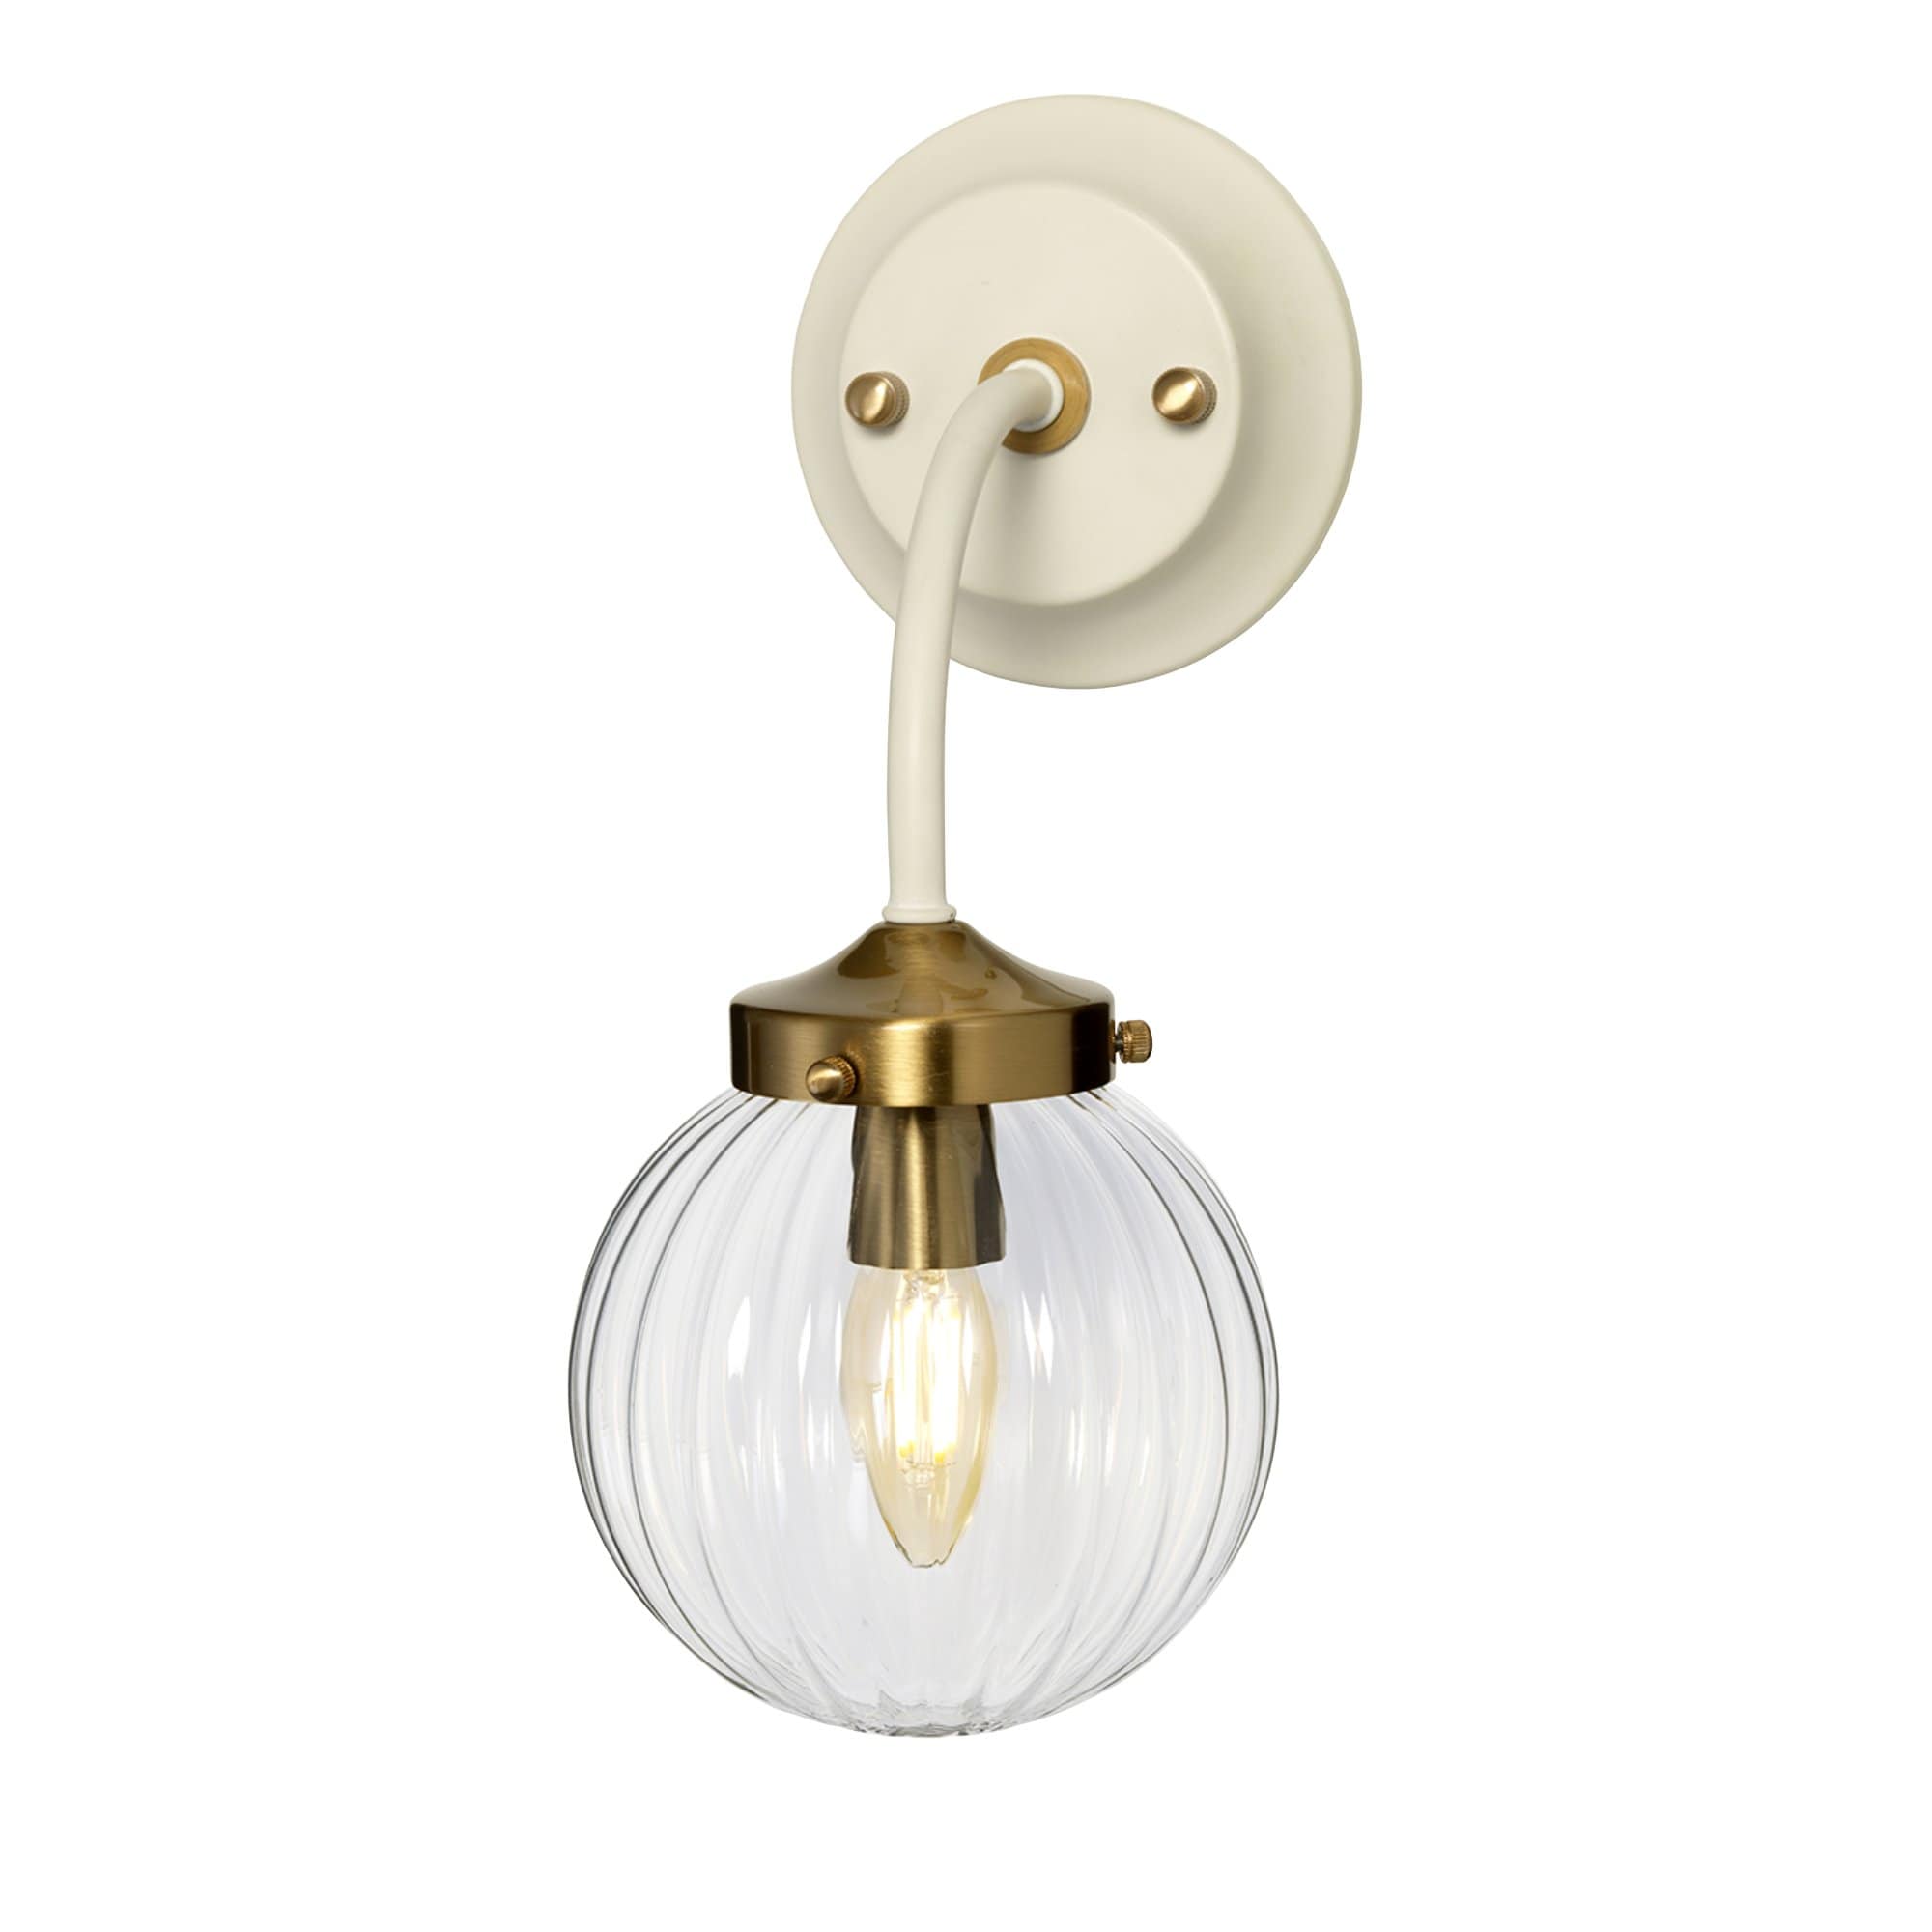 Cooper Wall Light - escapologyhome.co.uk